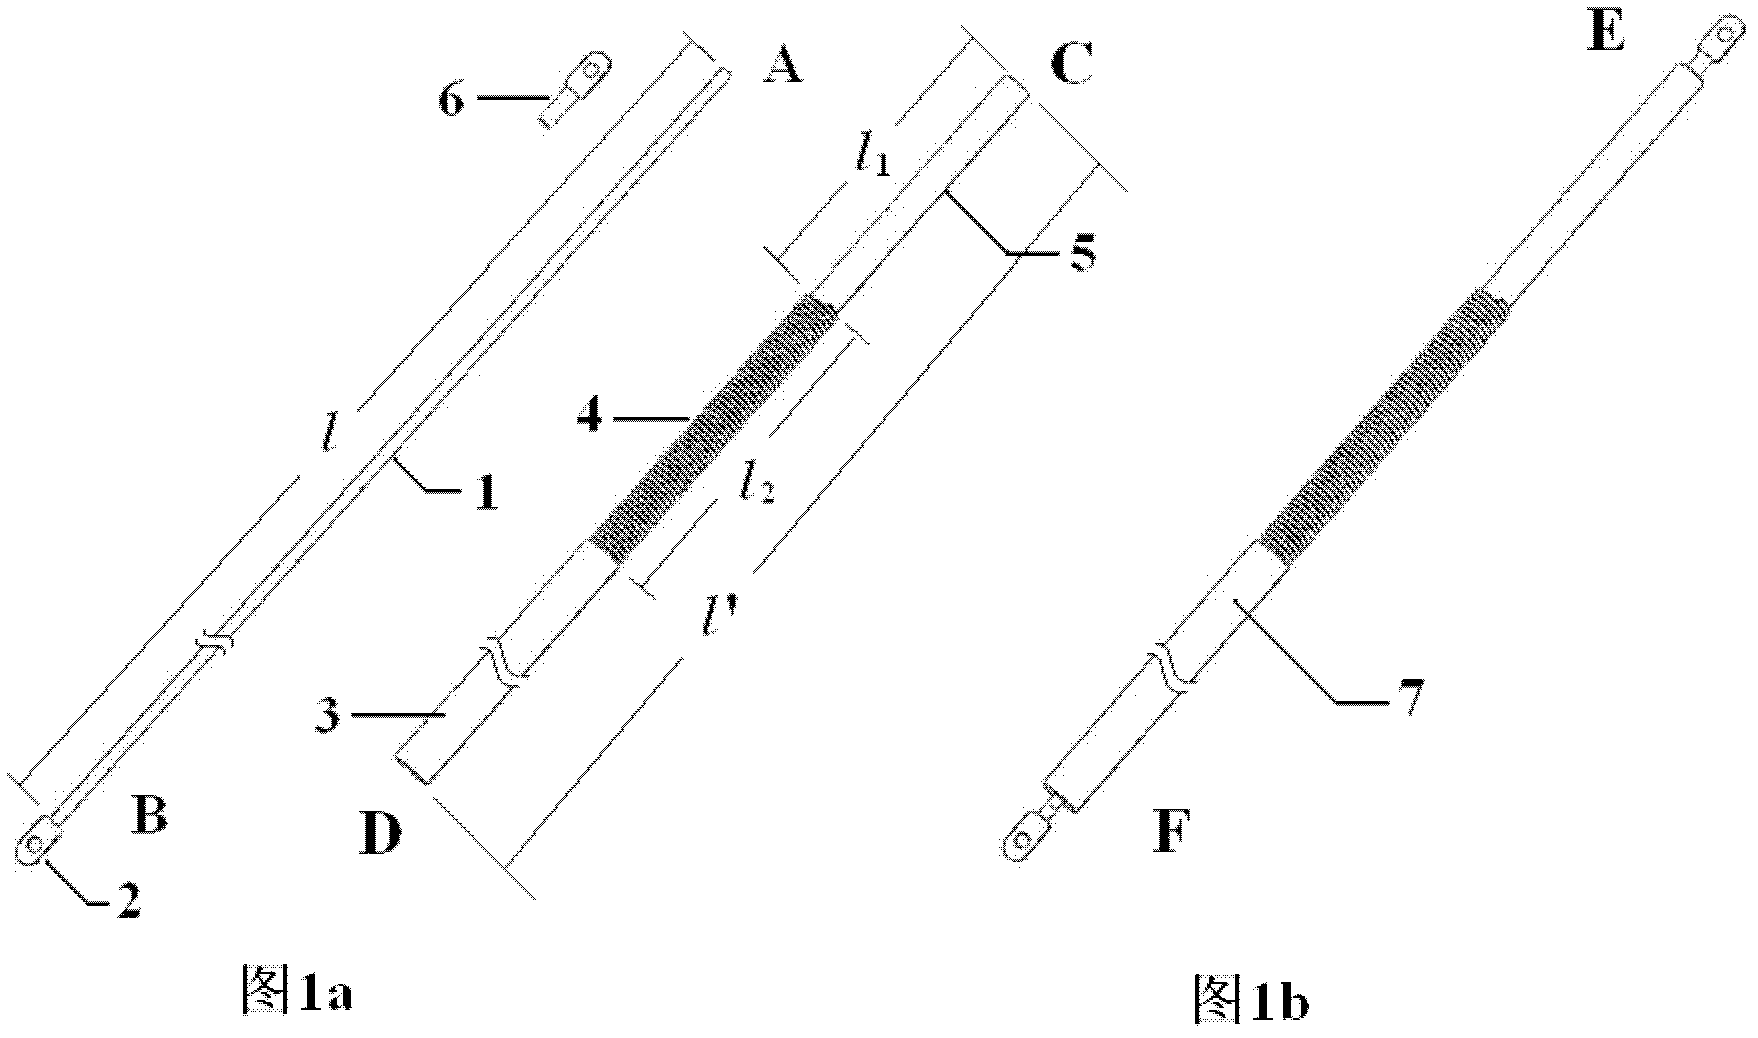 High voltage insulation current lead for superconductive electric device